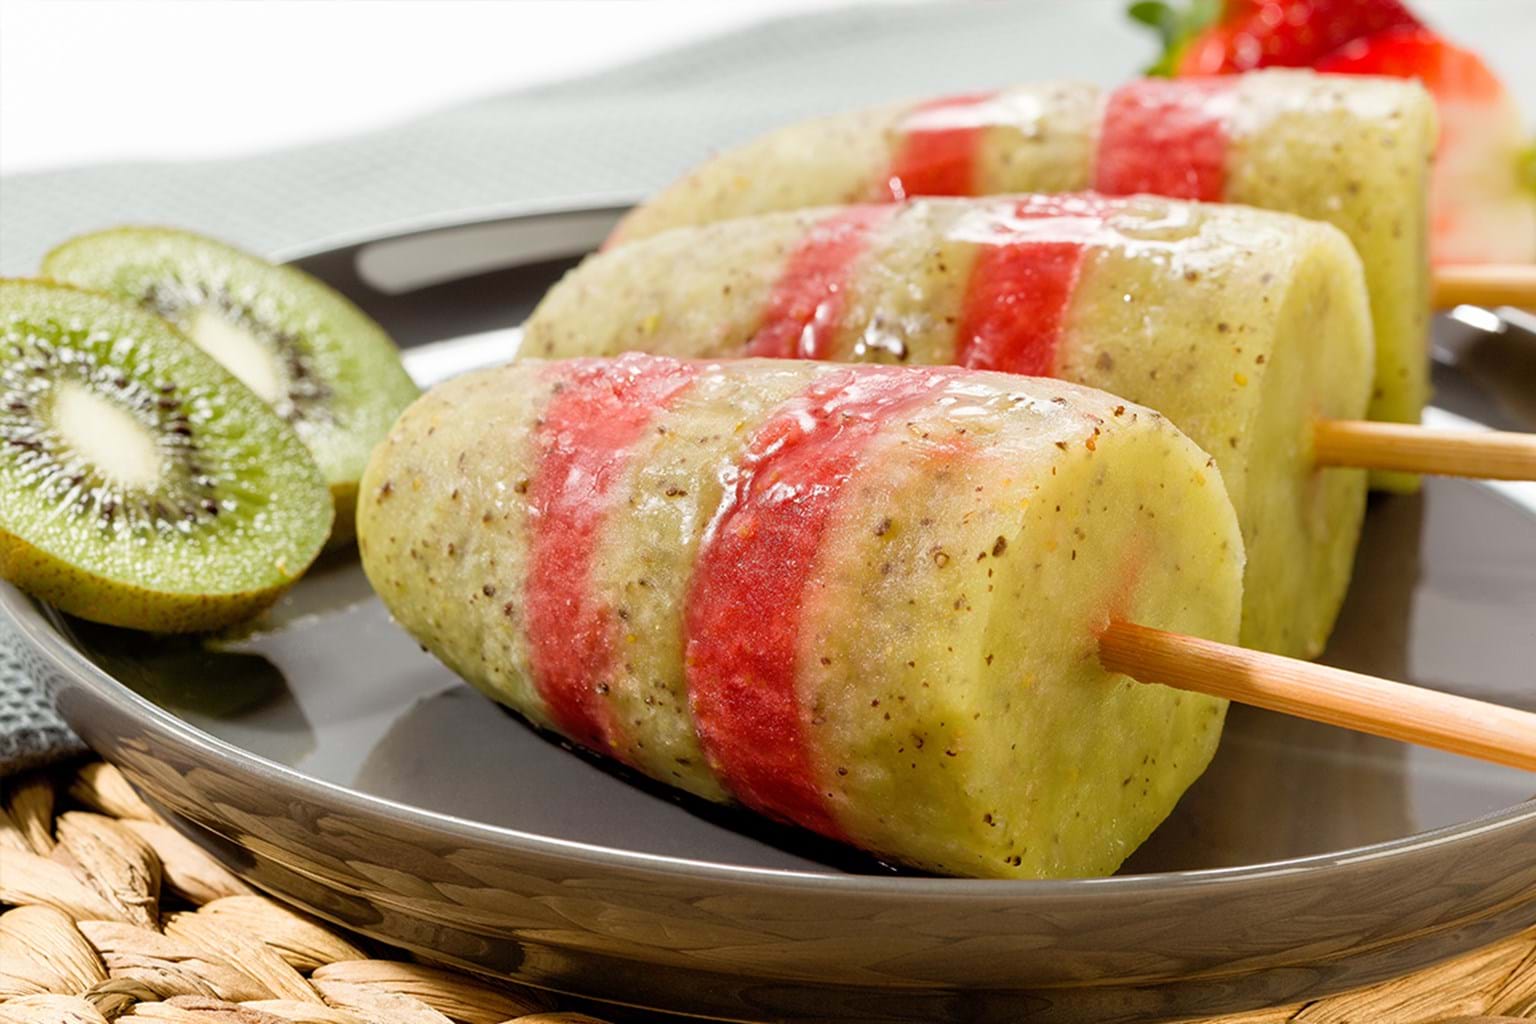 Ice lollies with kiwi and strawberries